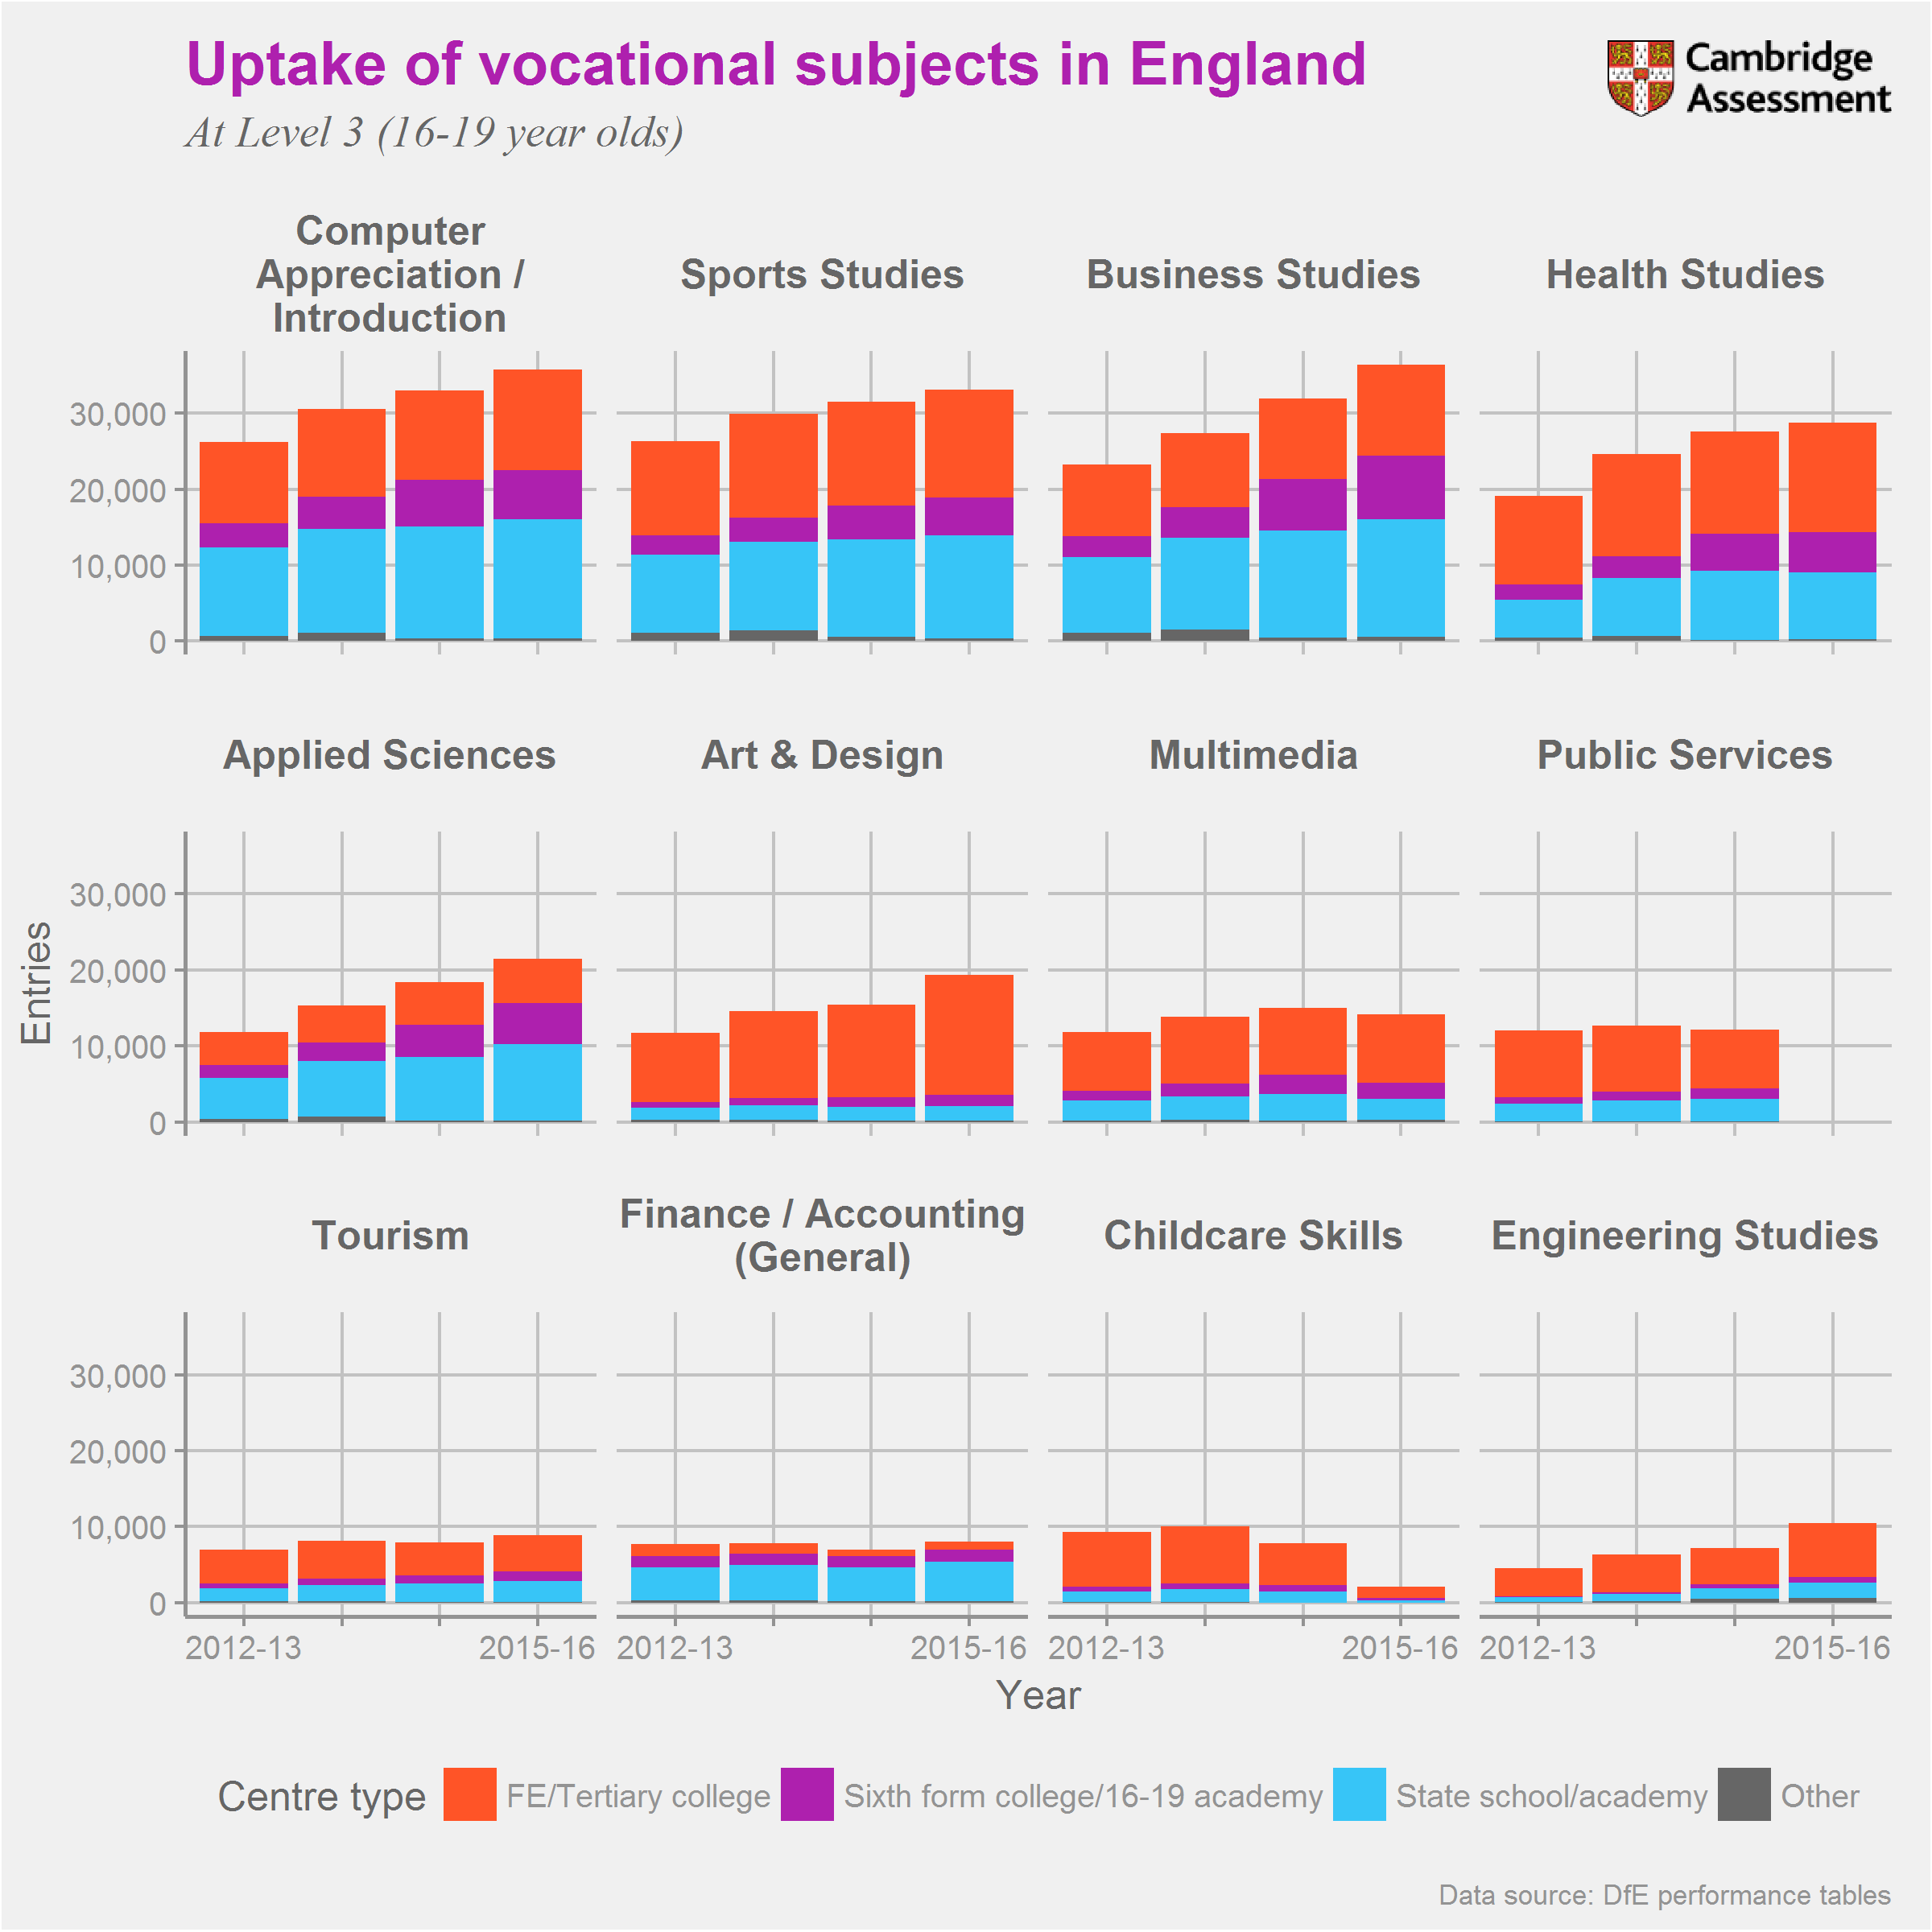 Graph of popularity of Level 3 vocational subjects in England by centre type